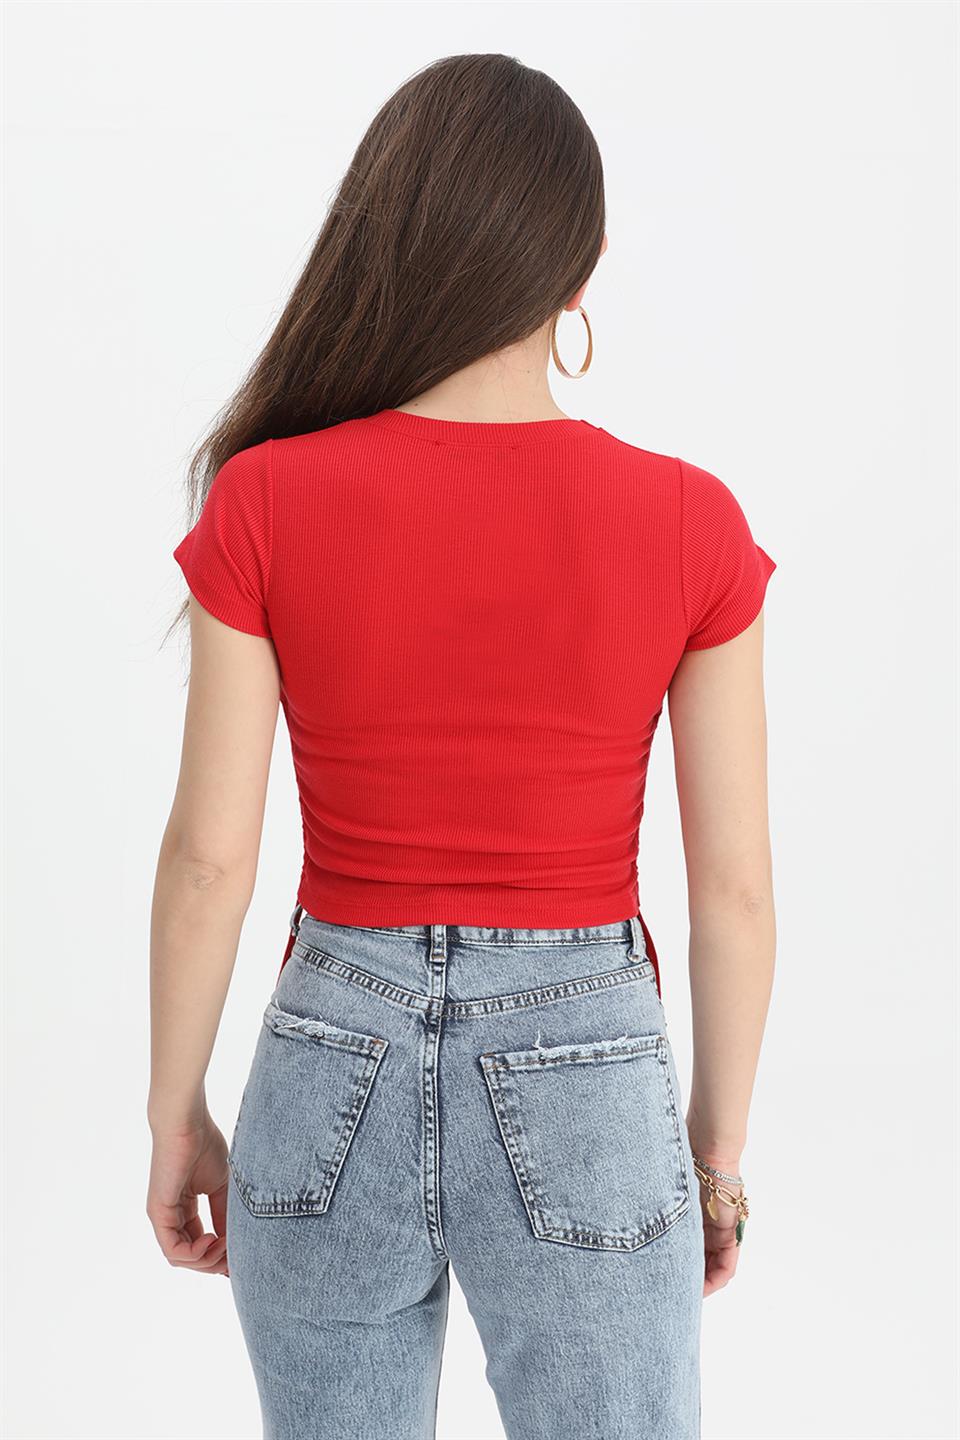 Women's Blouse Crew Neck Pleated Sides - Red - STREETMODE™